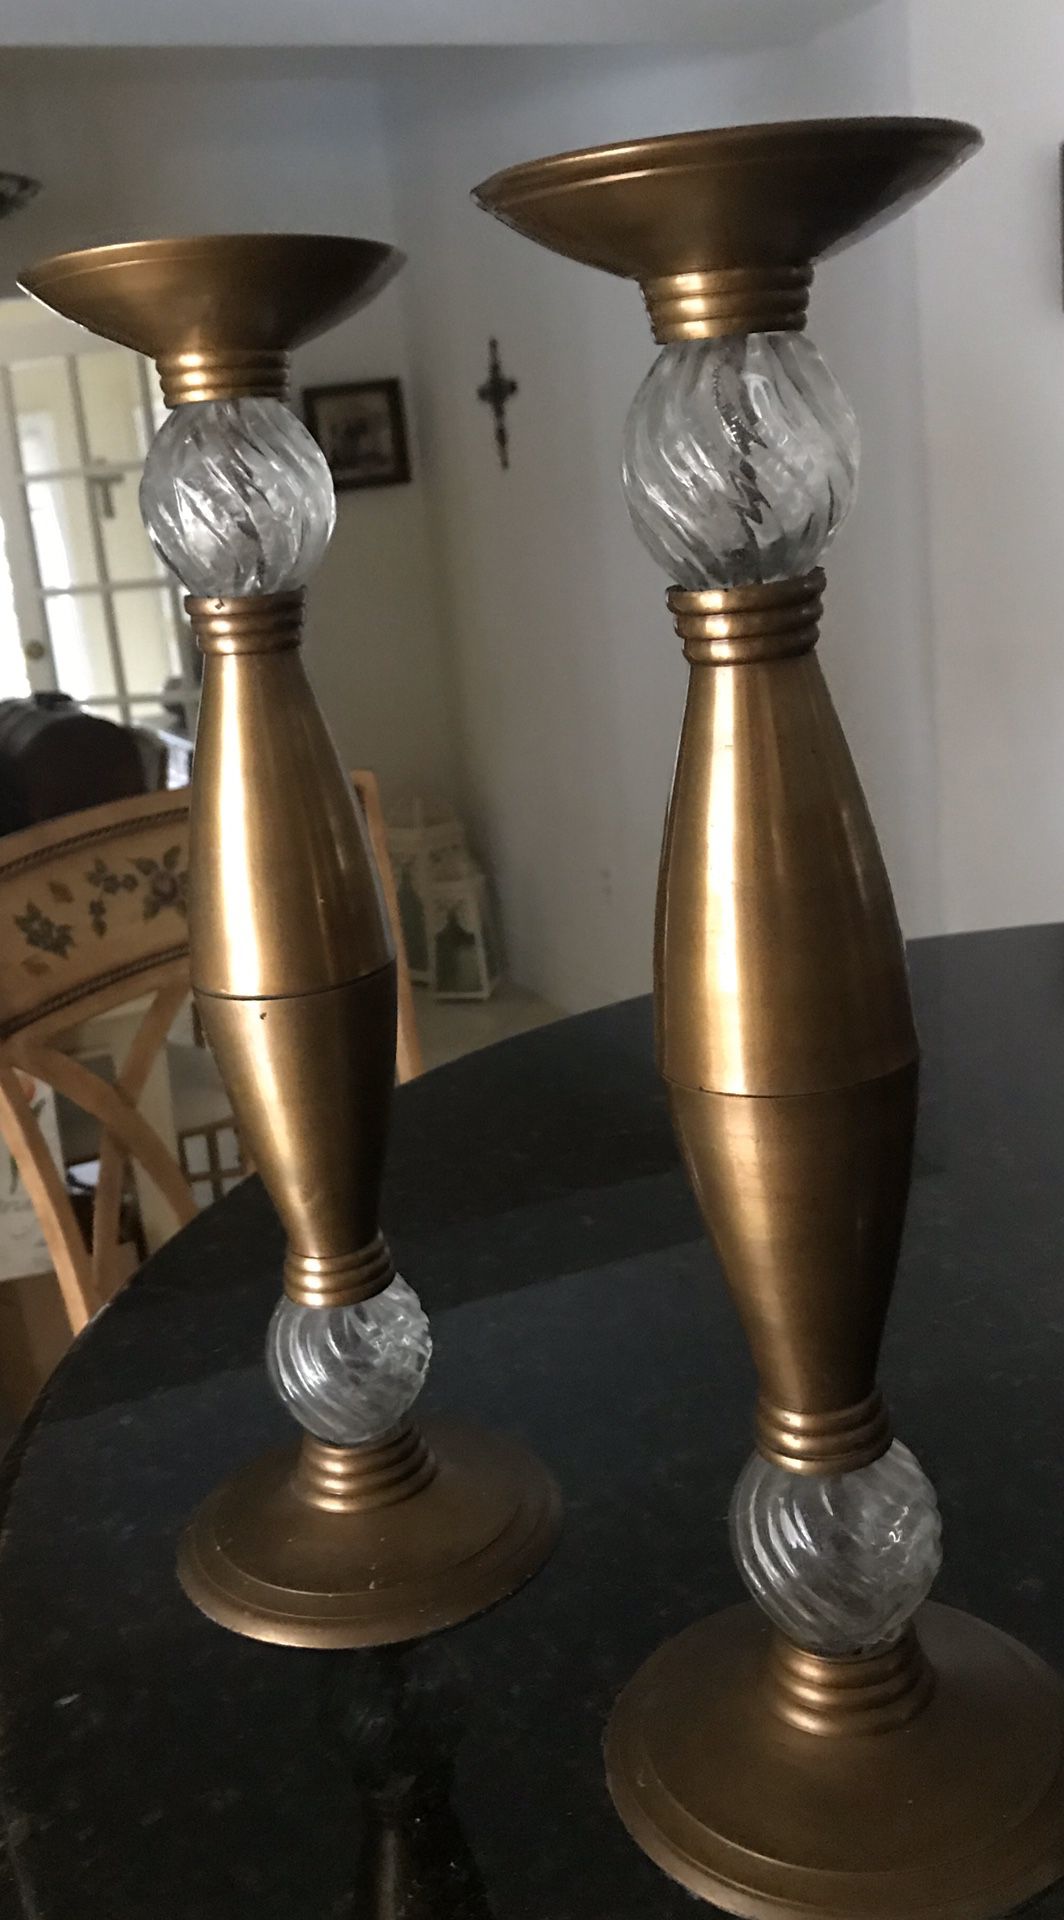 Bronze and glass Candle holders